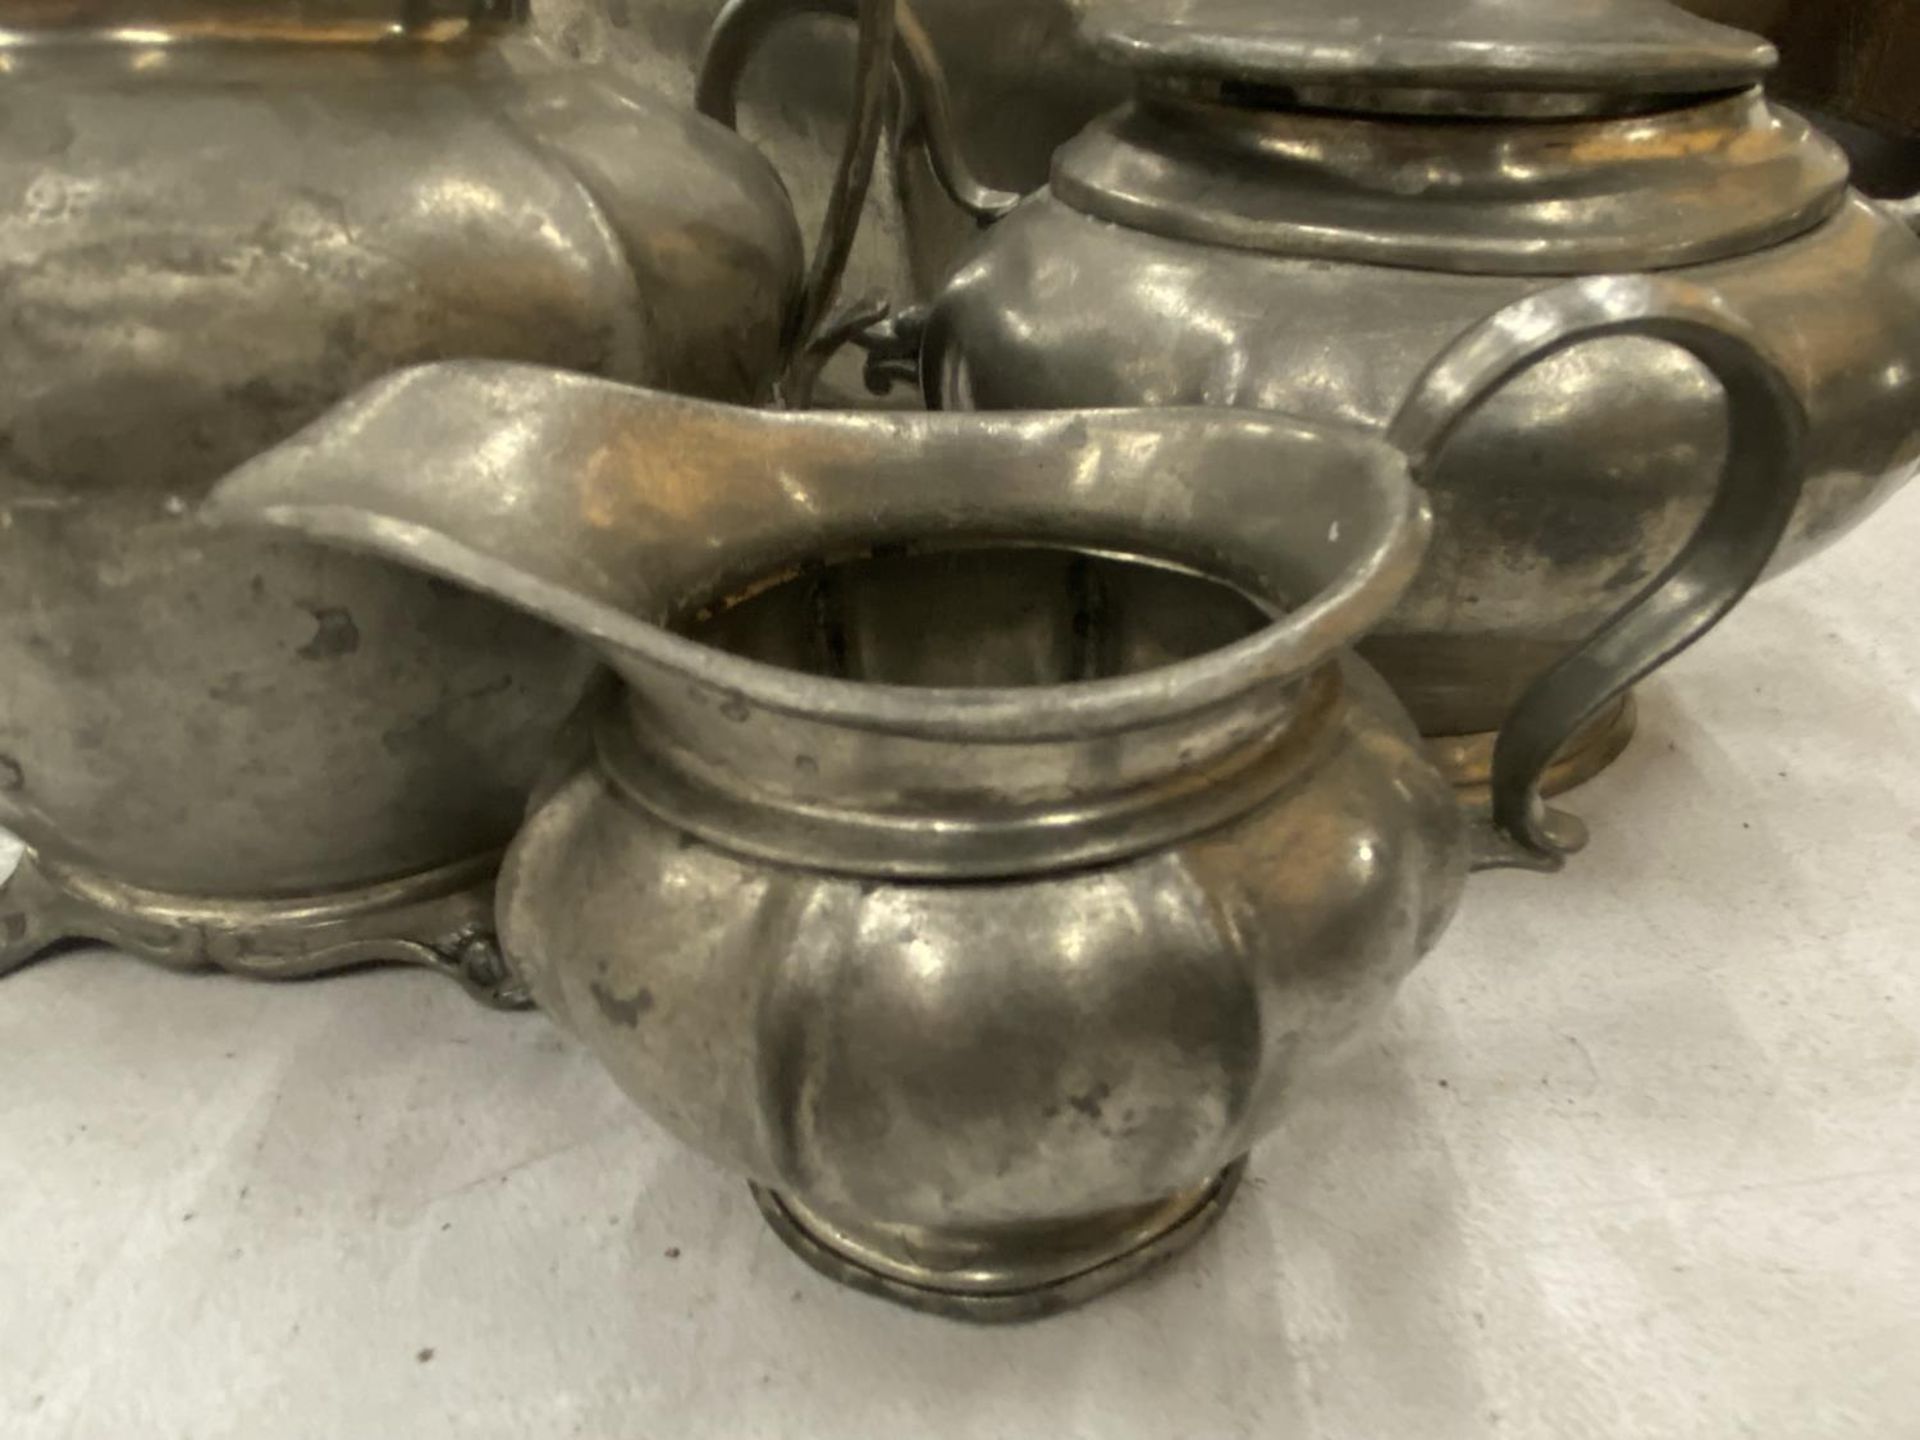 A PEWTER TEASET TO INCLUDE TEAPOT, SUGAR, MILK AND HOT WATER JUG - Image 3 of 6